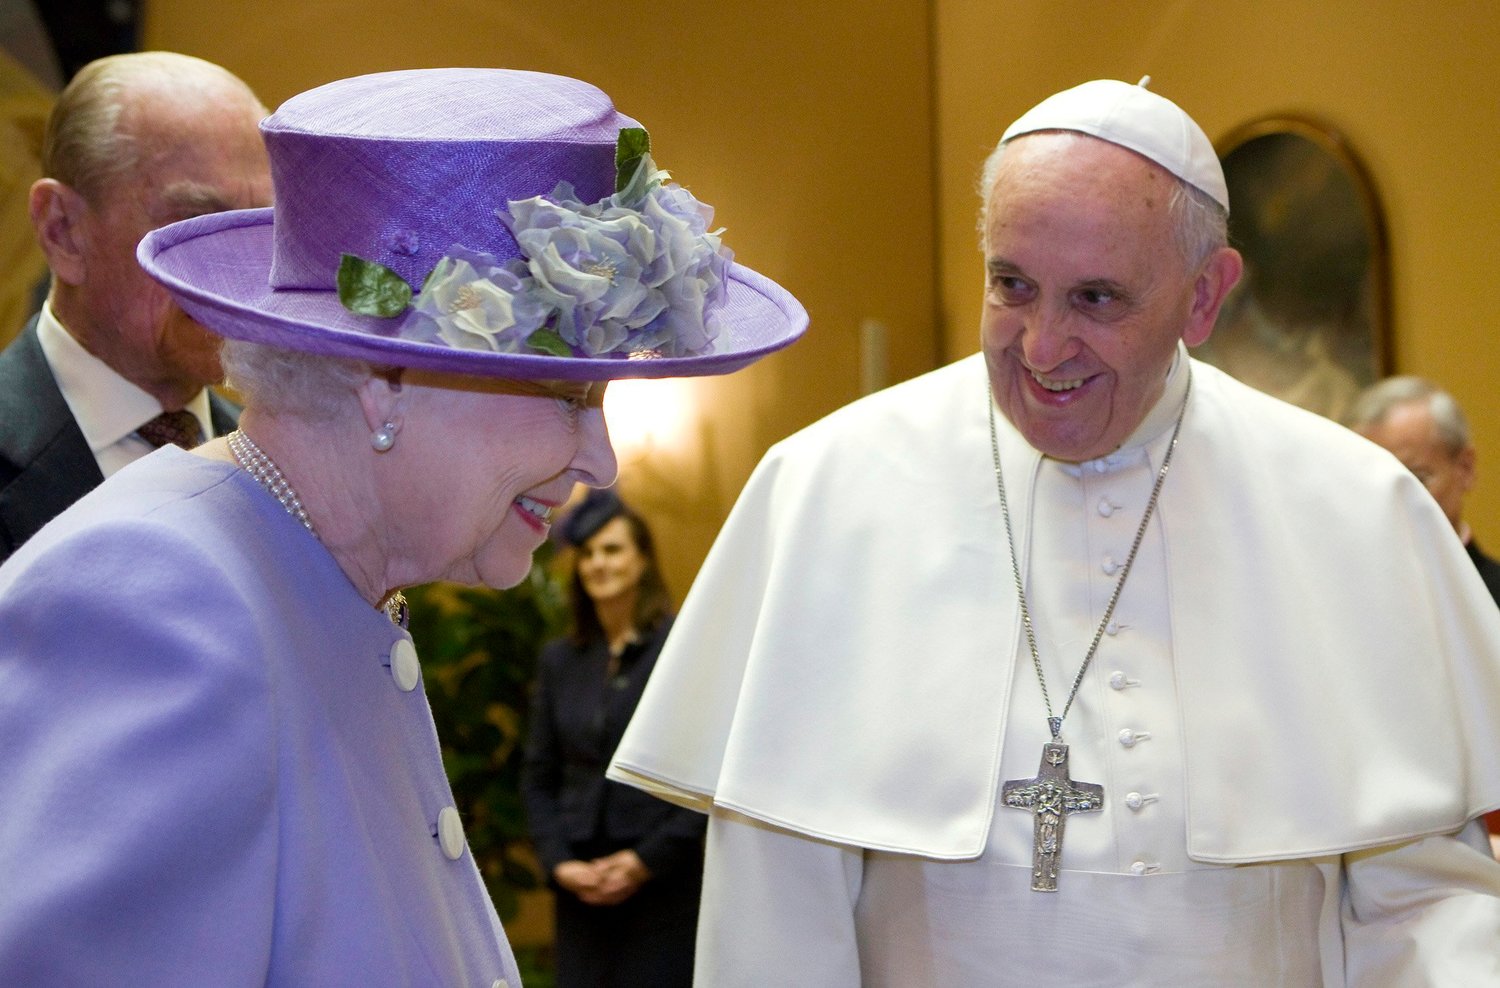 Britain's Queen Elizabeth II talks with Pope Francis during a meeting at the Vatican in this April 3, 2014, file photo. Queen Elizabeth died Sept. 8, 2022, at the age of 96.